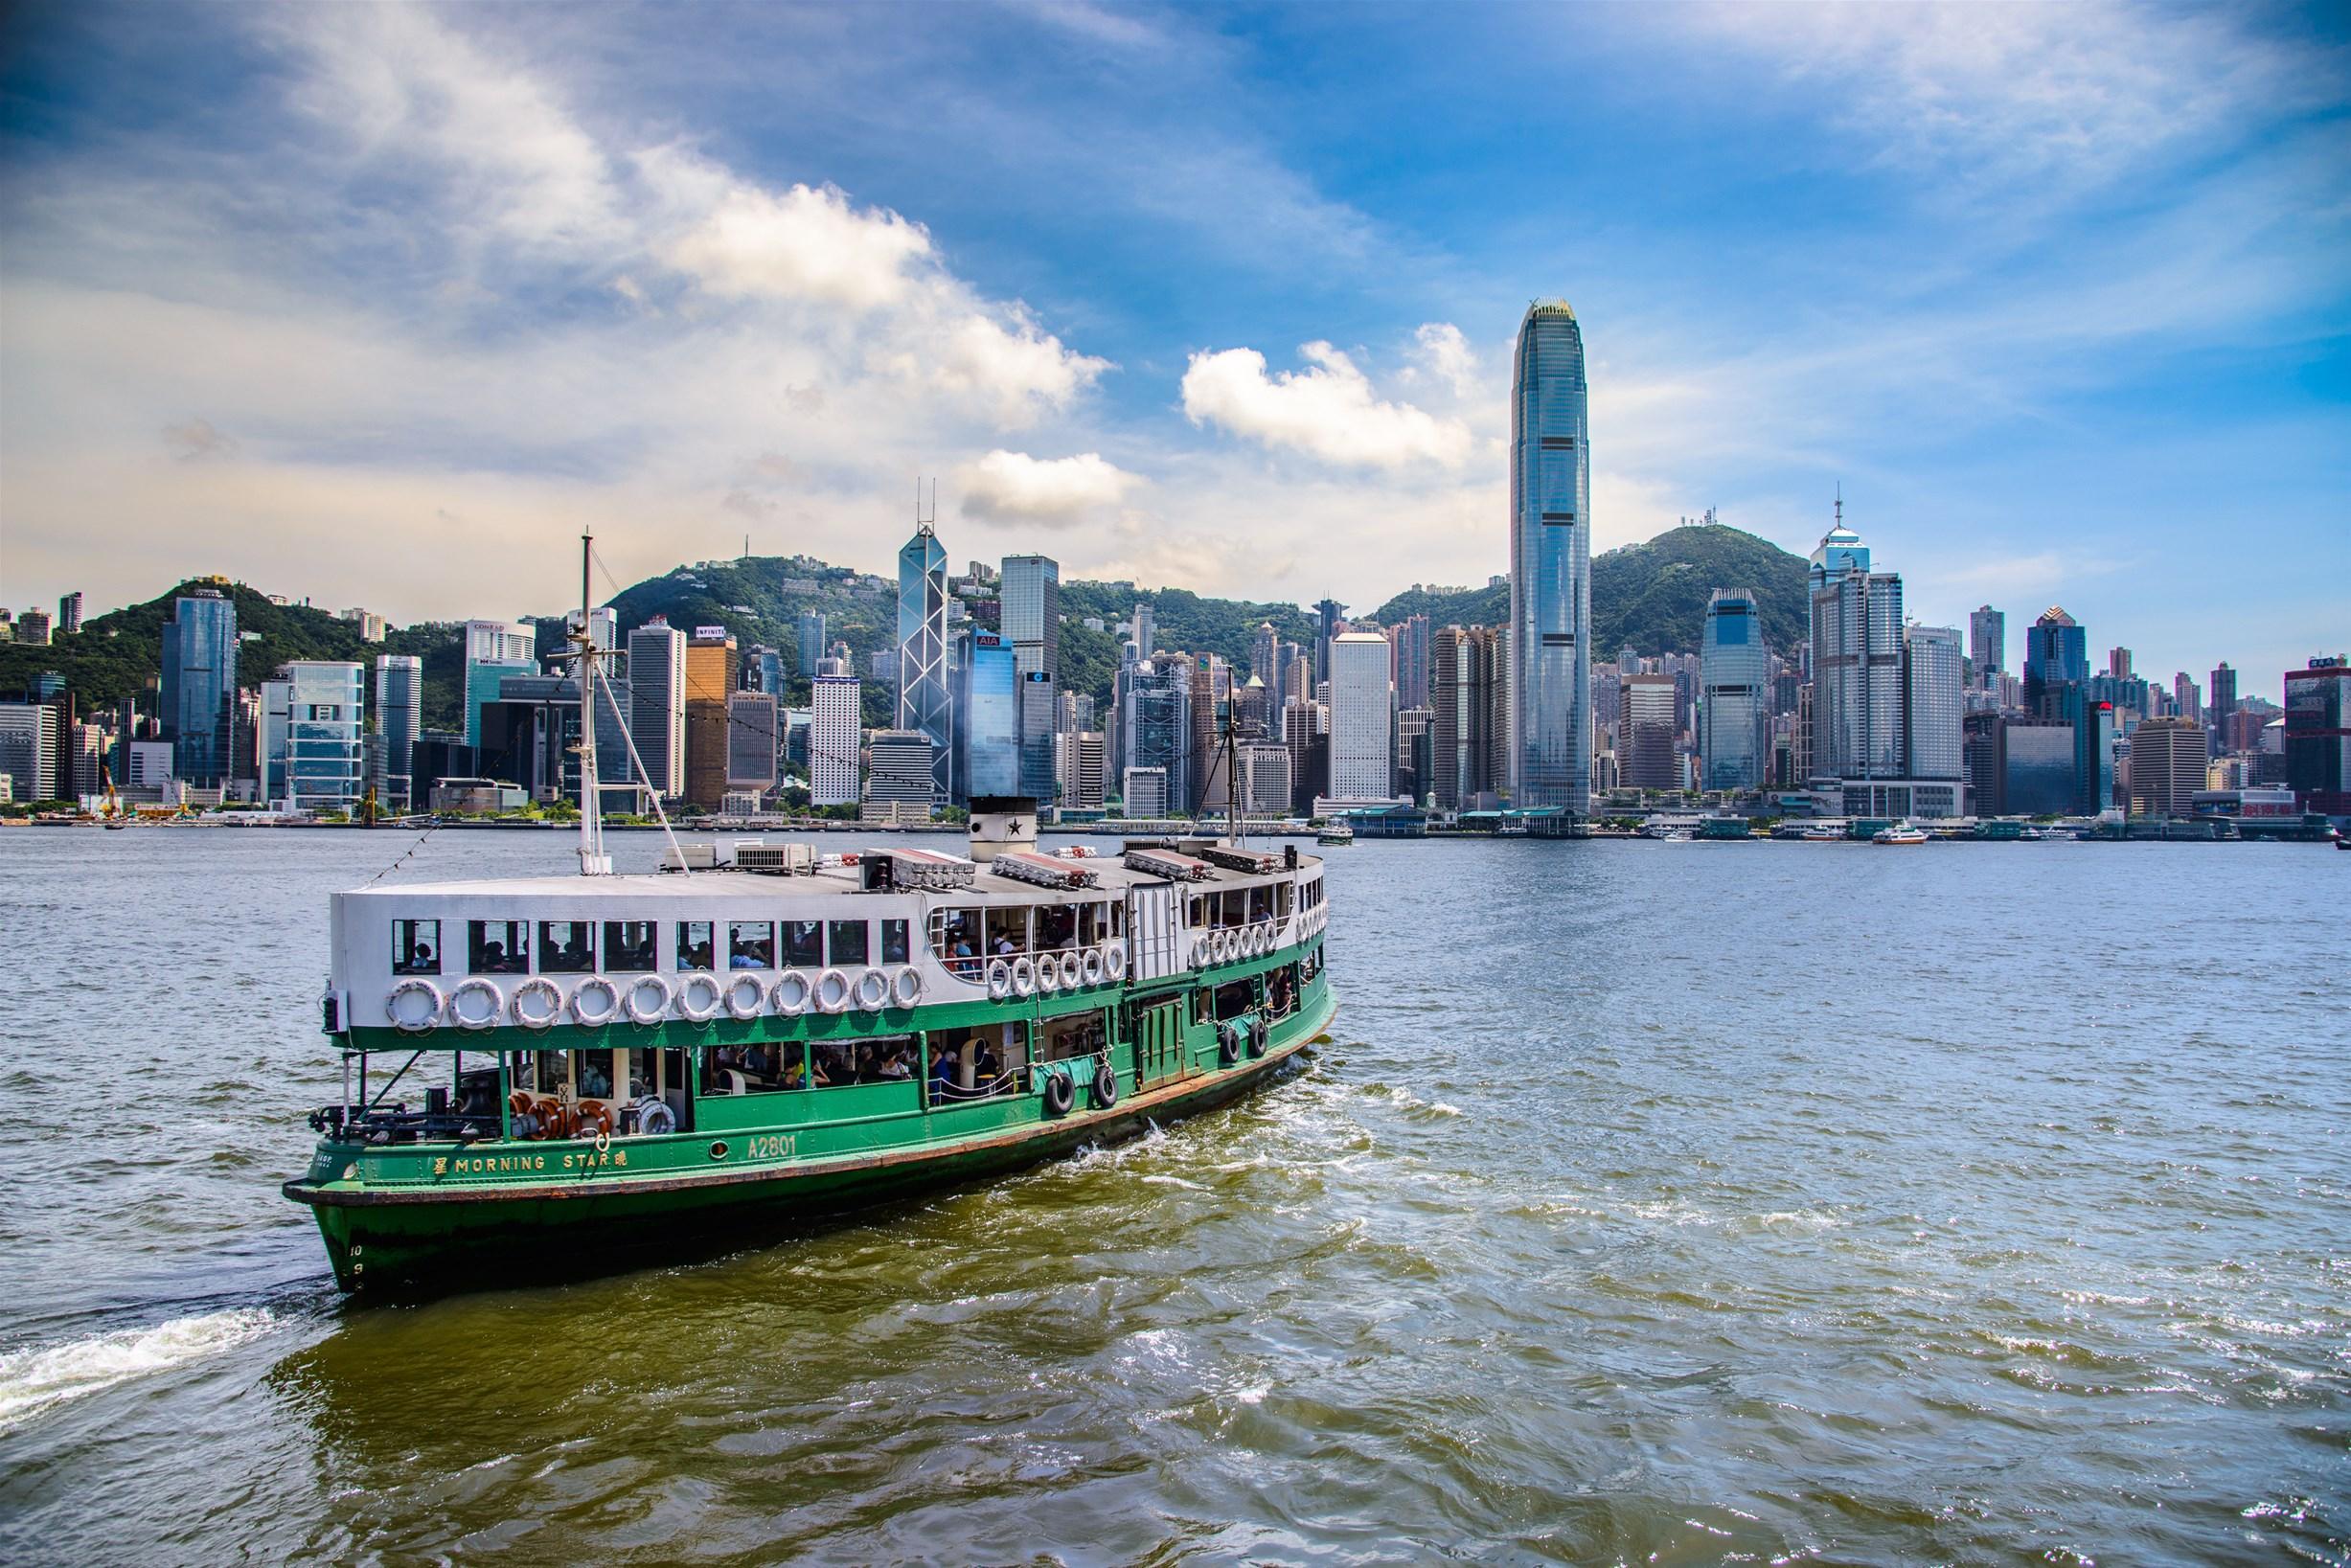 The Star Ferry crossed Hong Kong harbour